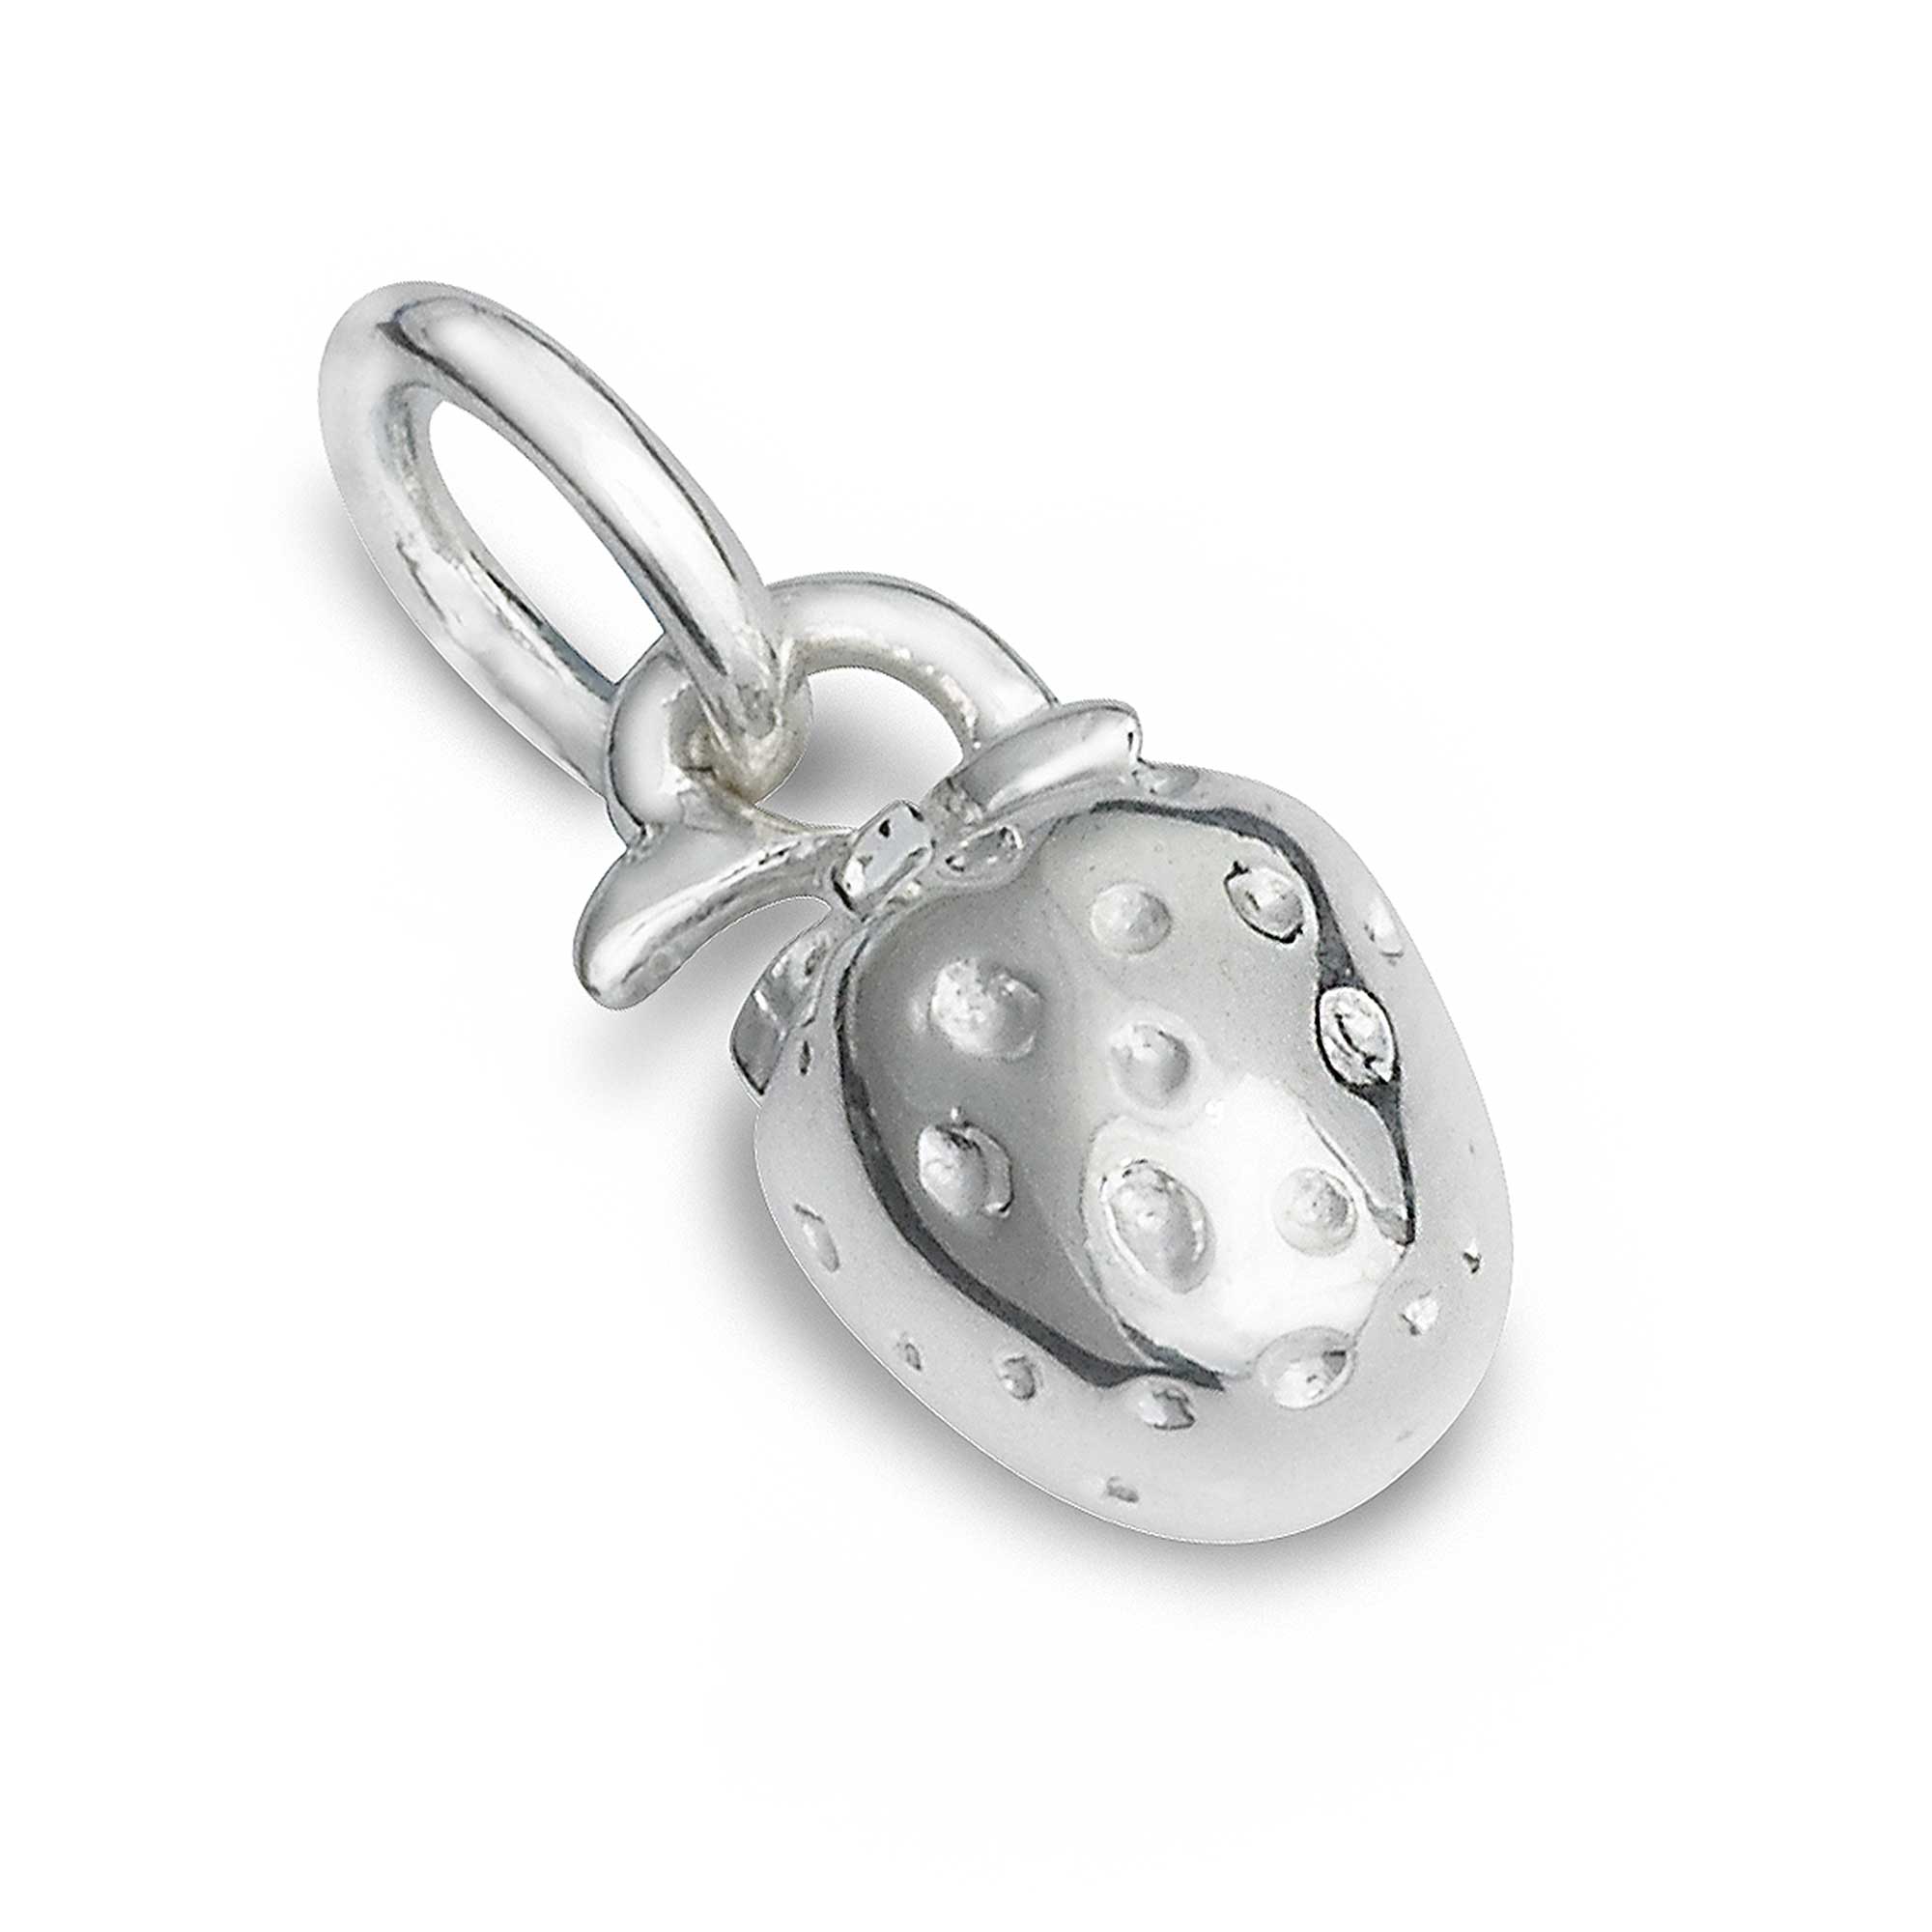 Strawberry silver wimbledon tennis charm for a silver bracelet links of london style